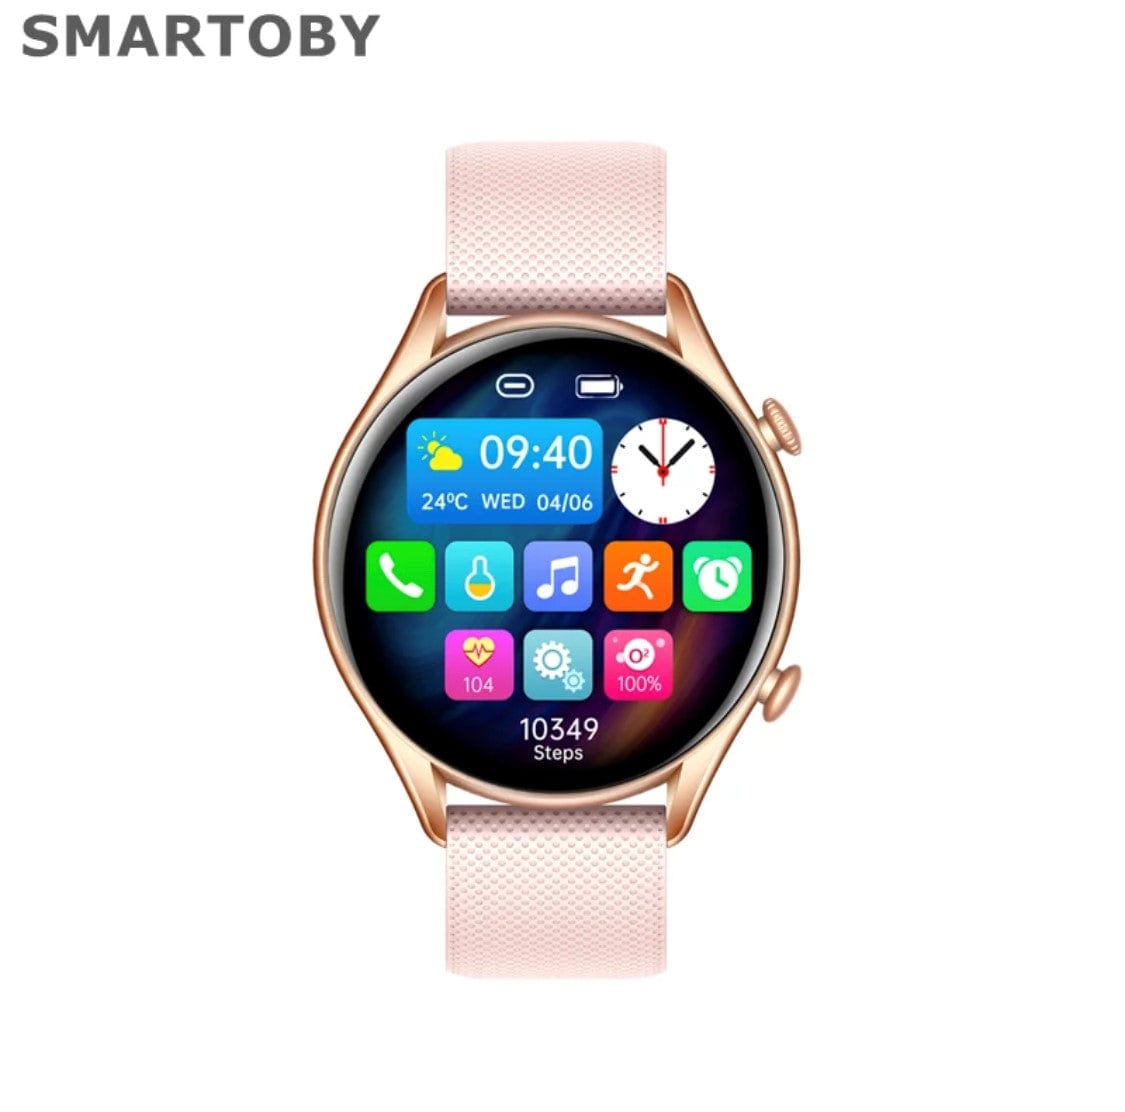 Smart Watch South Africa Watches Pink Smartoby P49 Pink